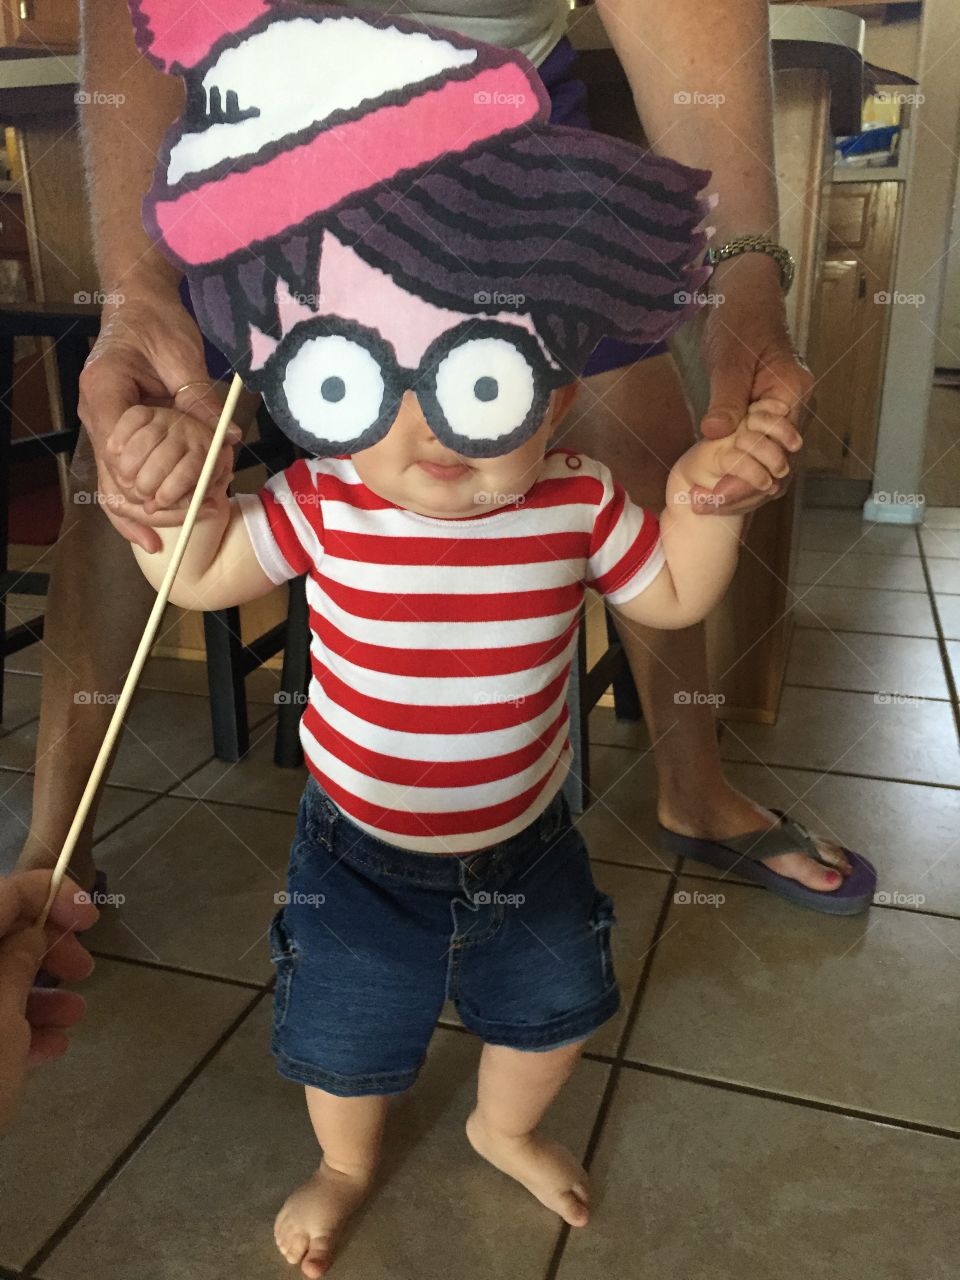 Where's Wally / Where's Waldo. At 9months, Oliver is ready for ComiCon!